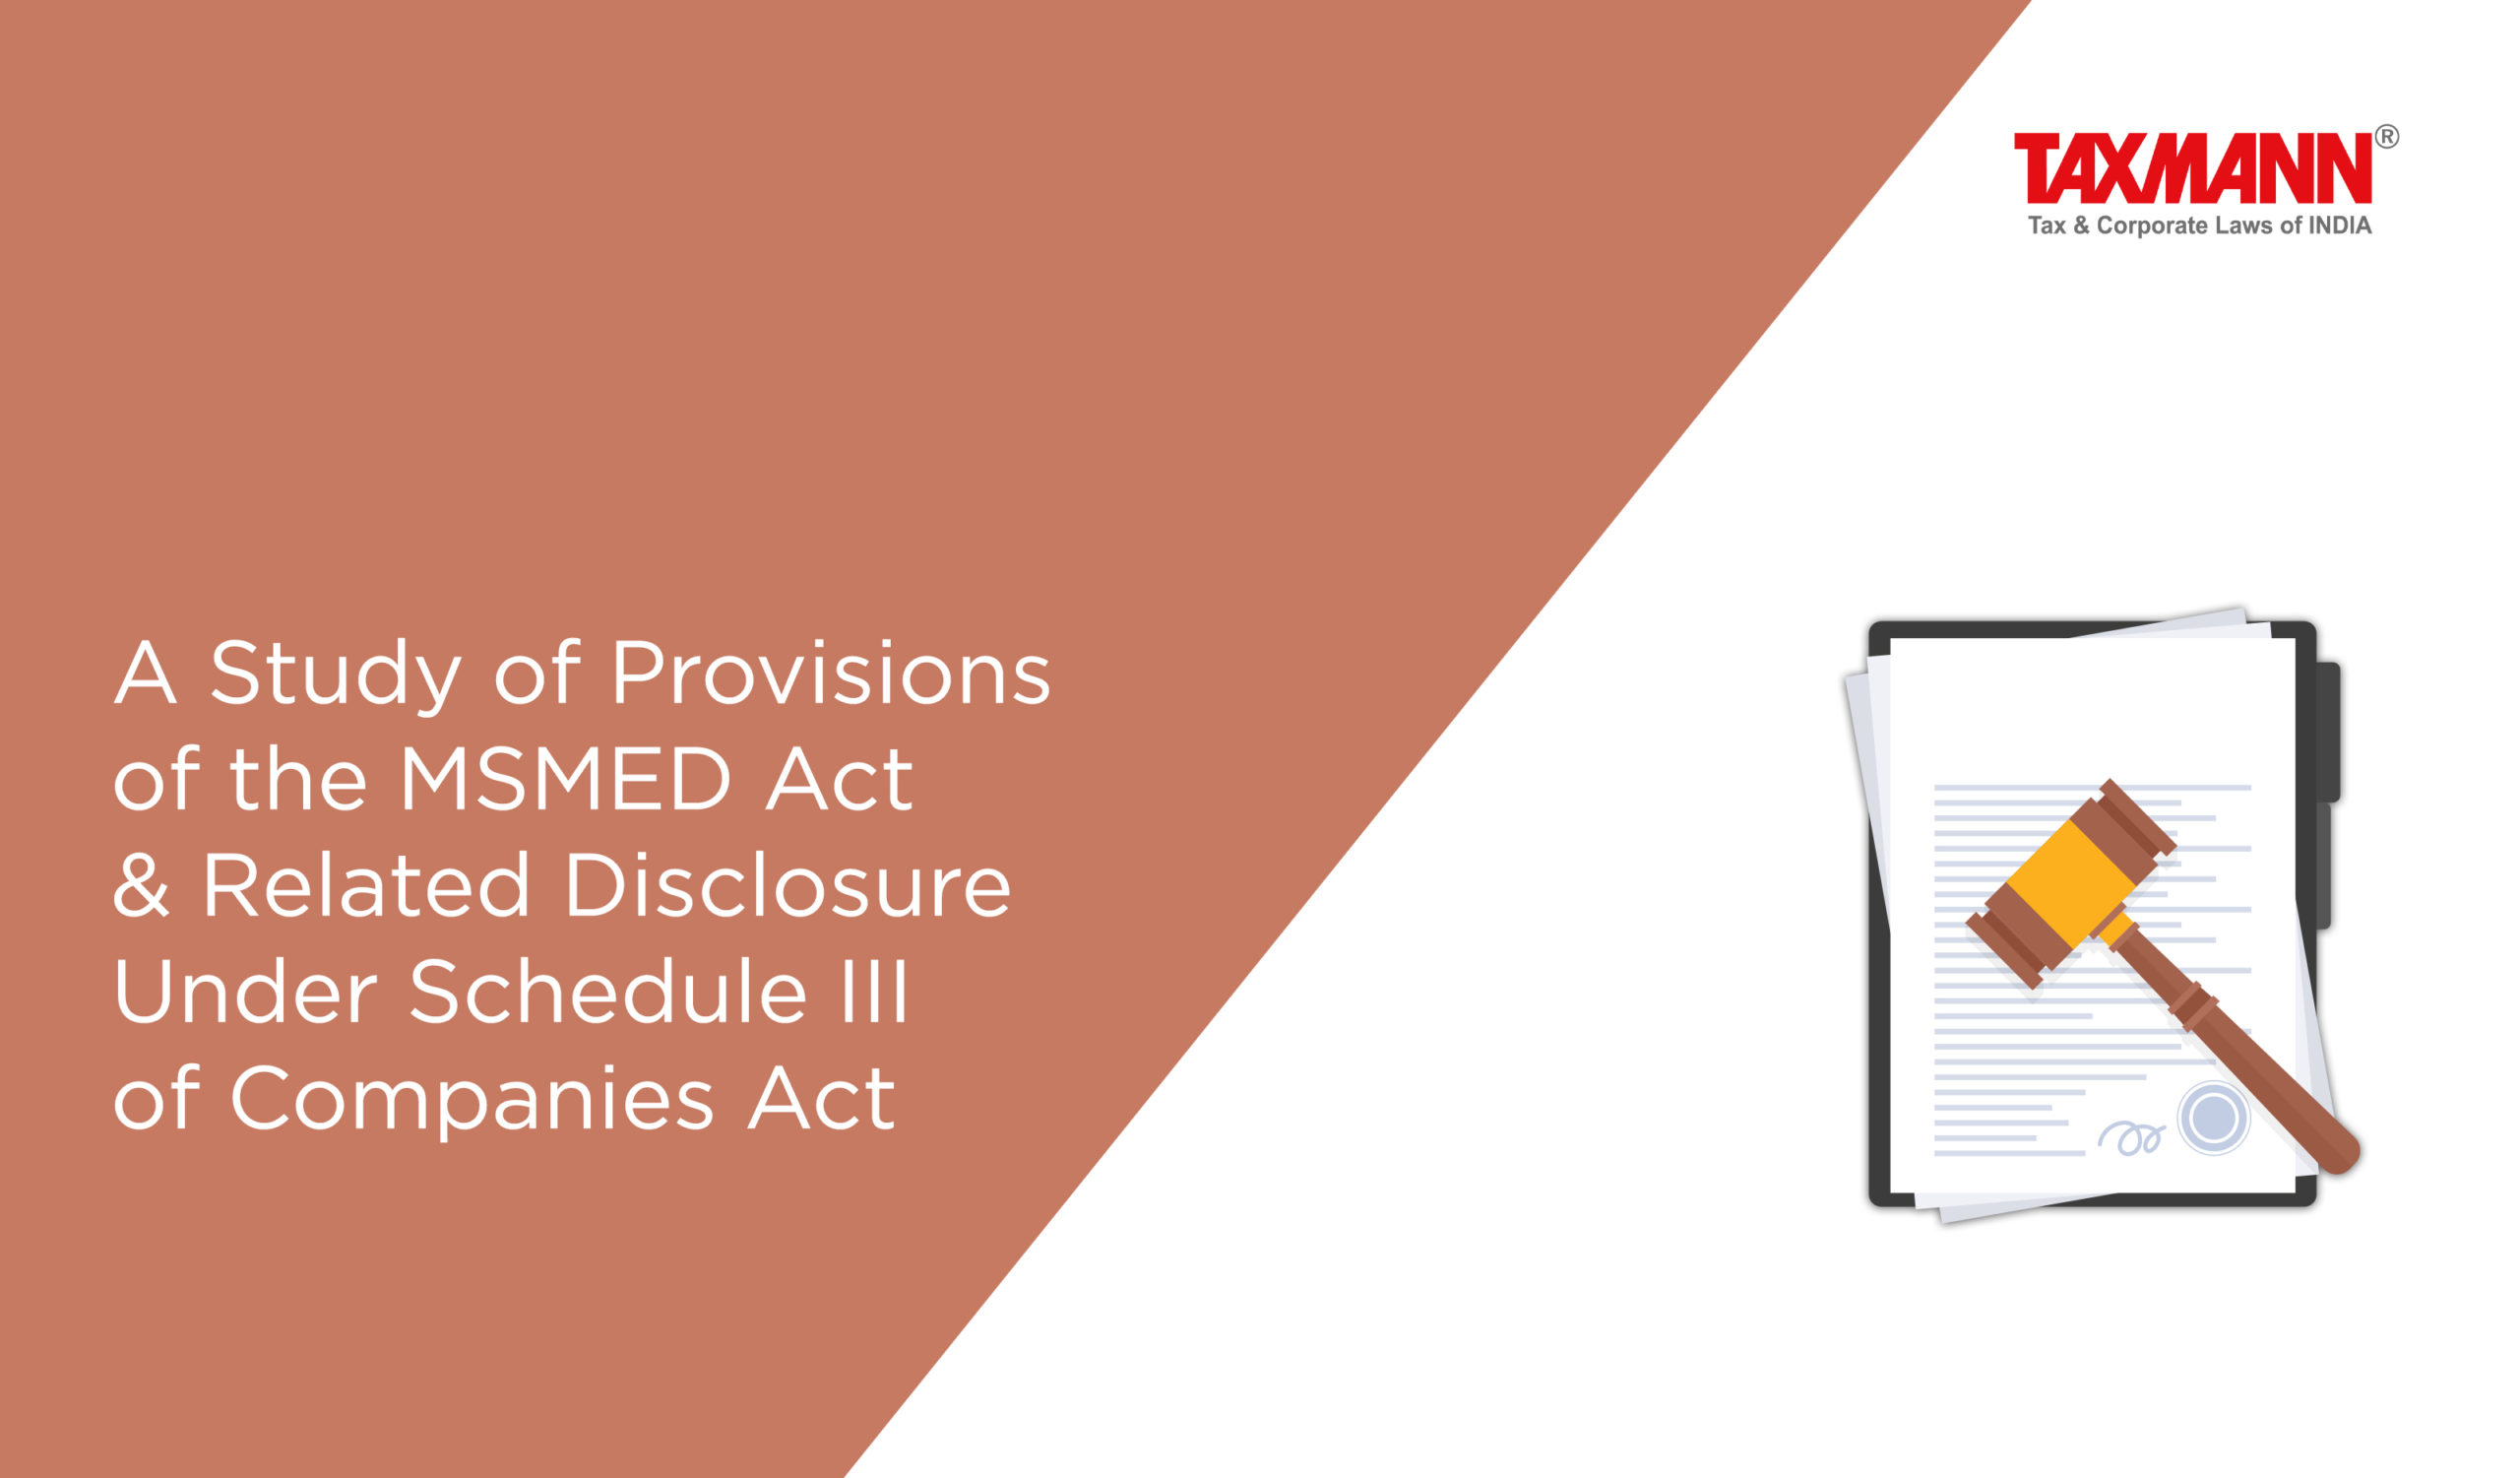 MSMED Act and Schedule III of Companies Act